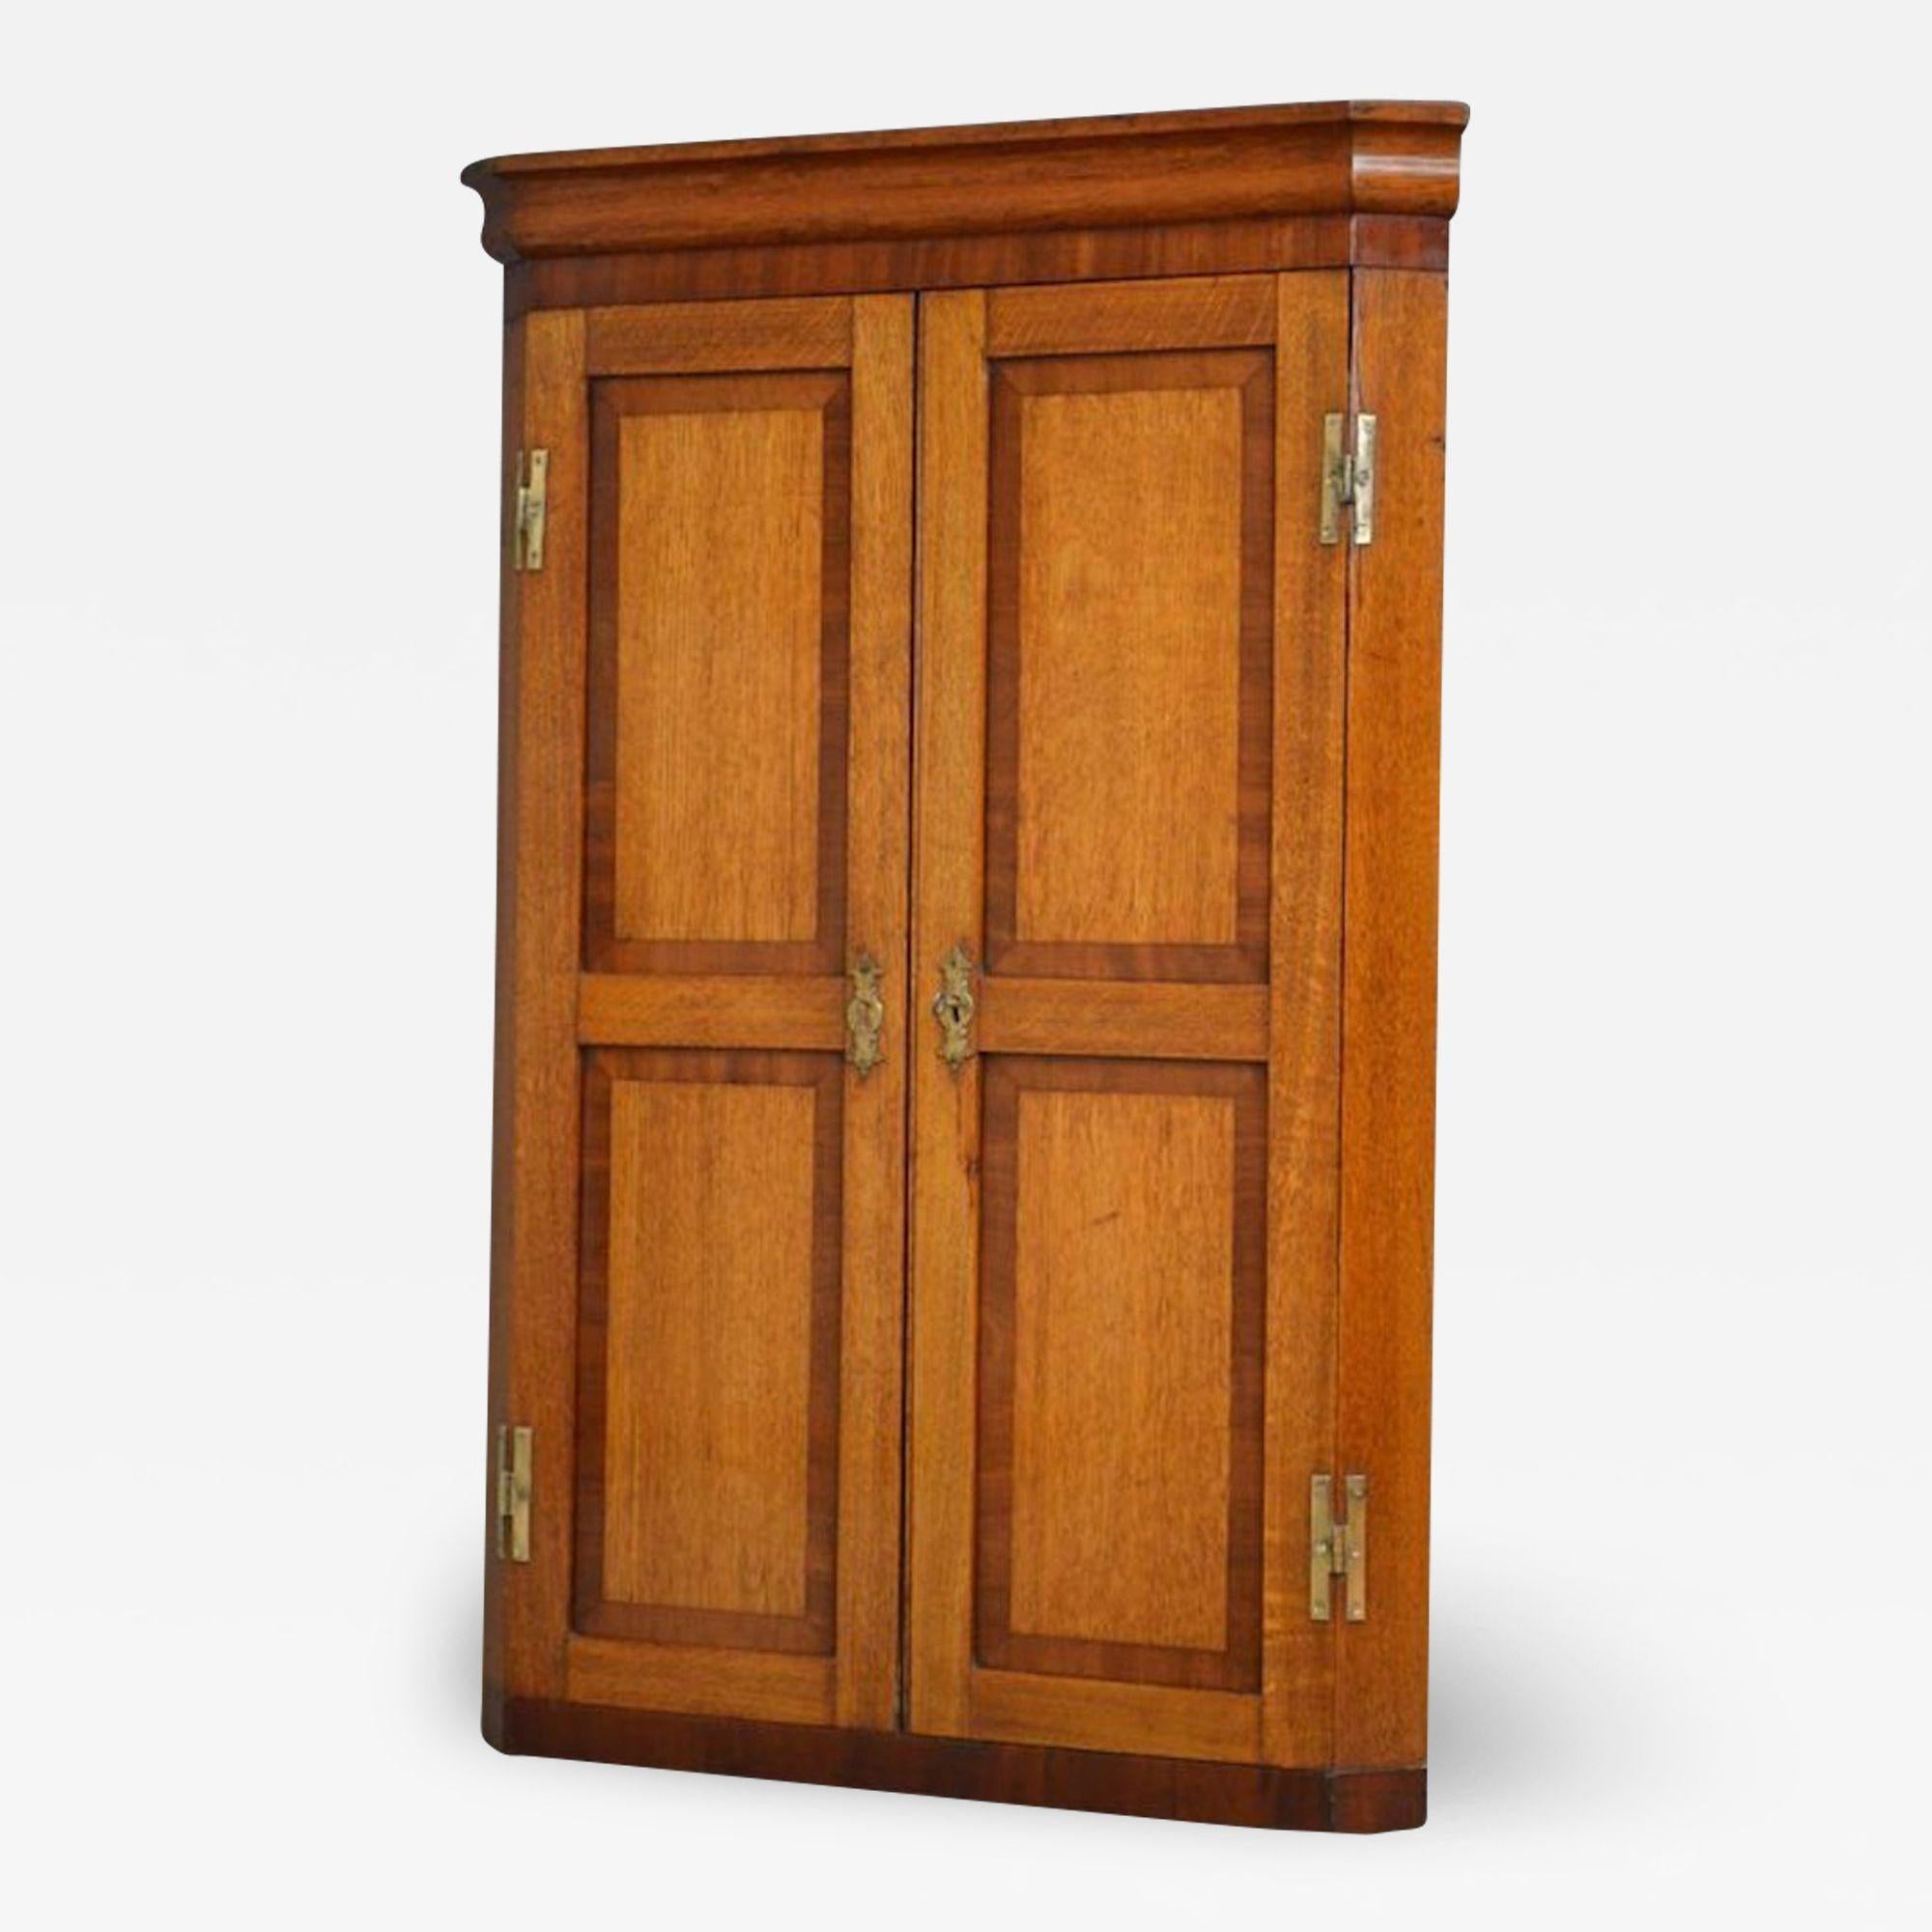 Sn3878, an attractive, Victorian oak and mahogany banded corner cupboard of soft and warm colour, having moulded cornice above a pair of double panelled cupboard doors enclosing shaped shelves, all fitted with original H hinges, brass escutcheons